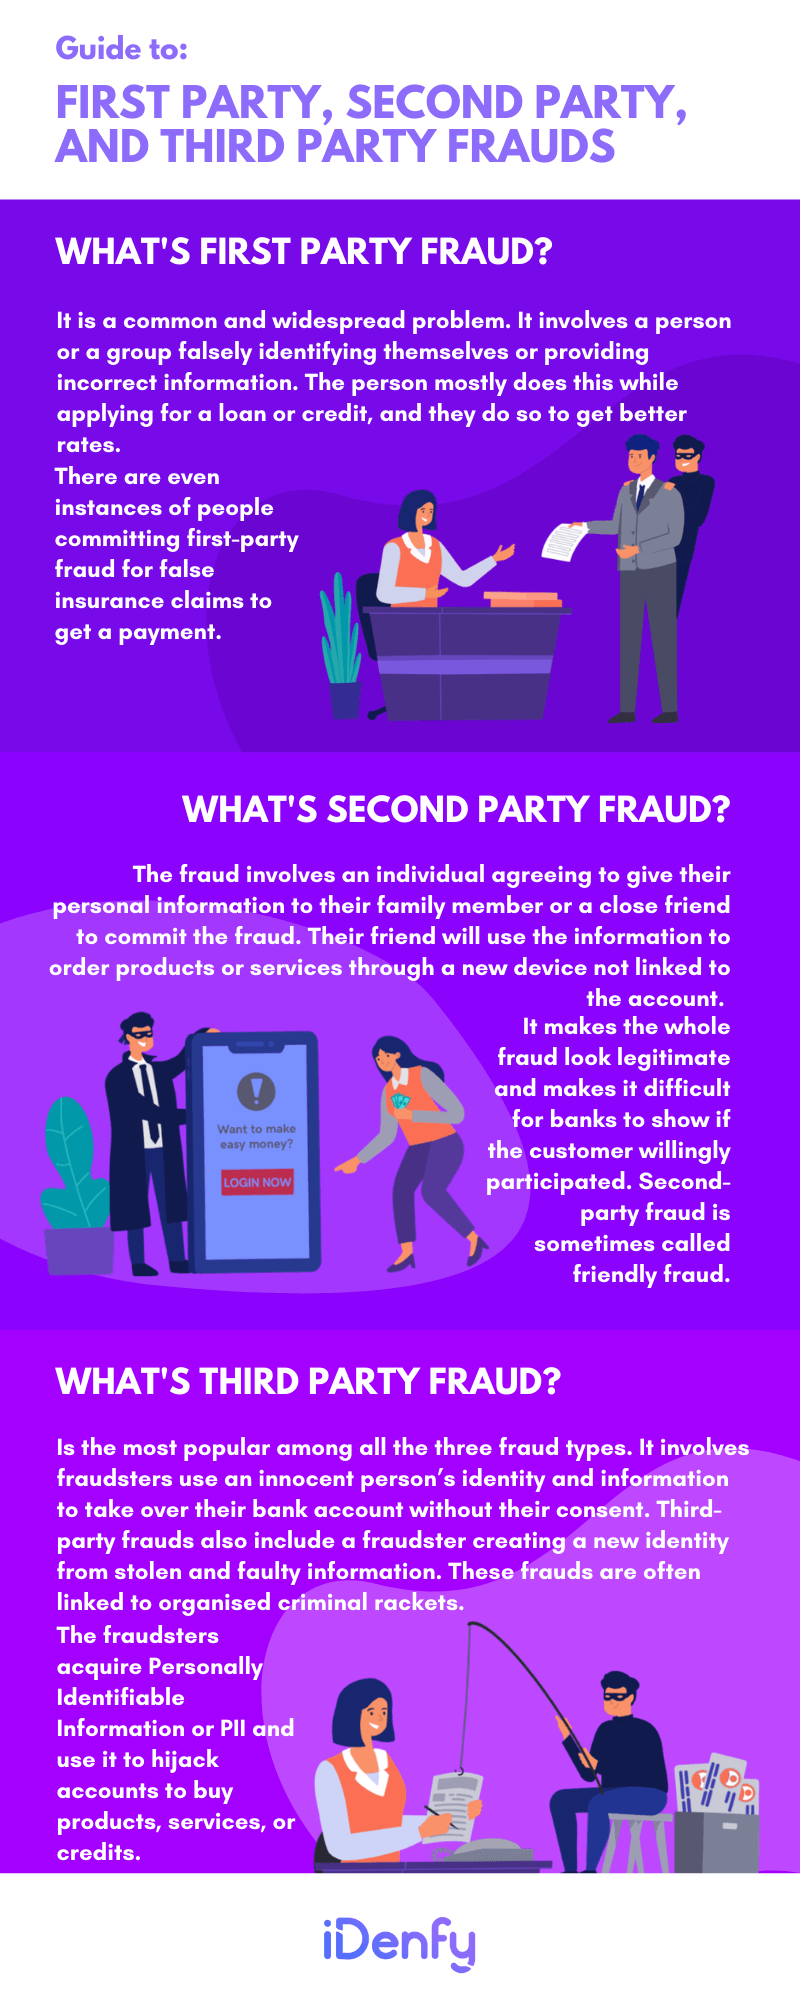 First Party, Second Party, and Third Party Frauds Infographic